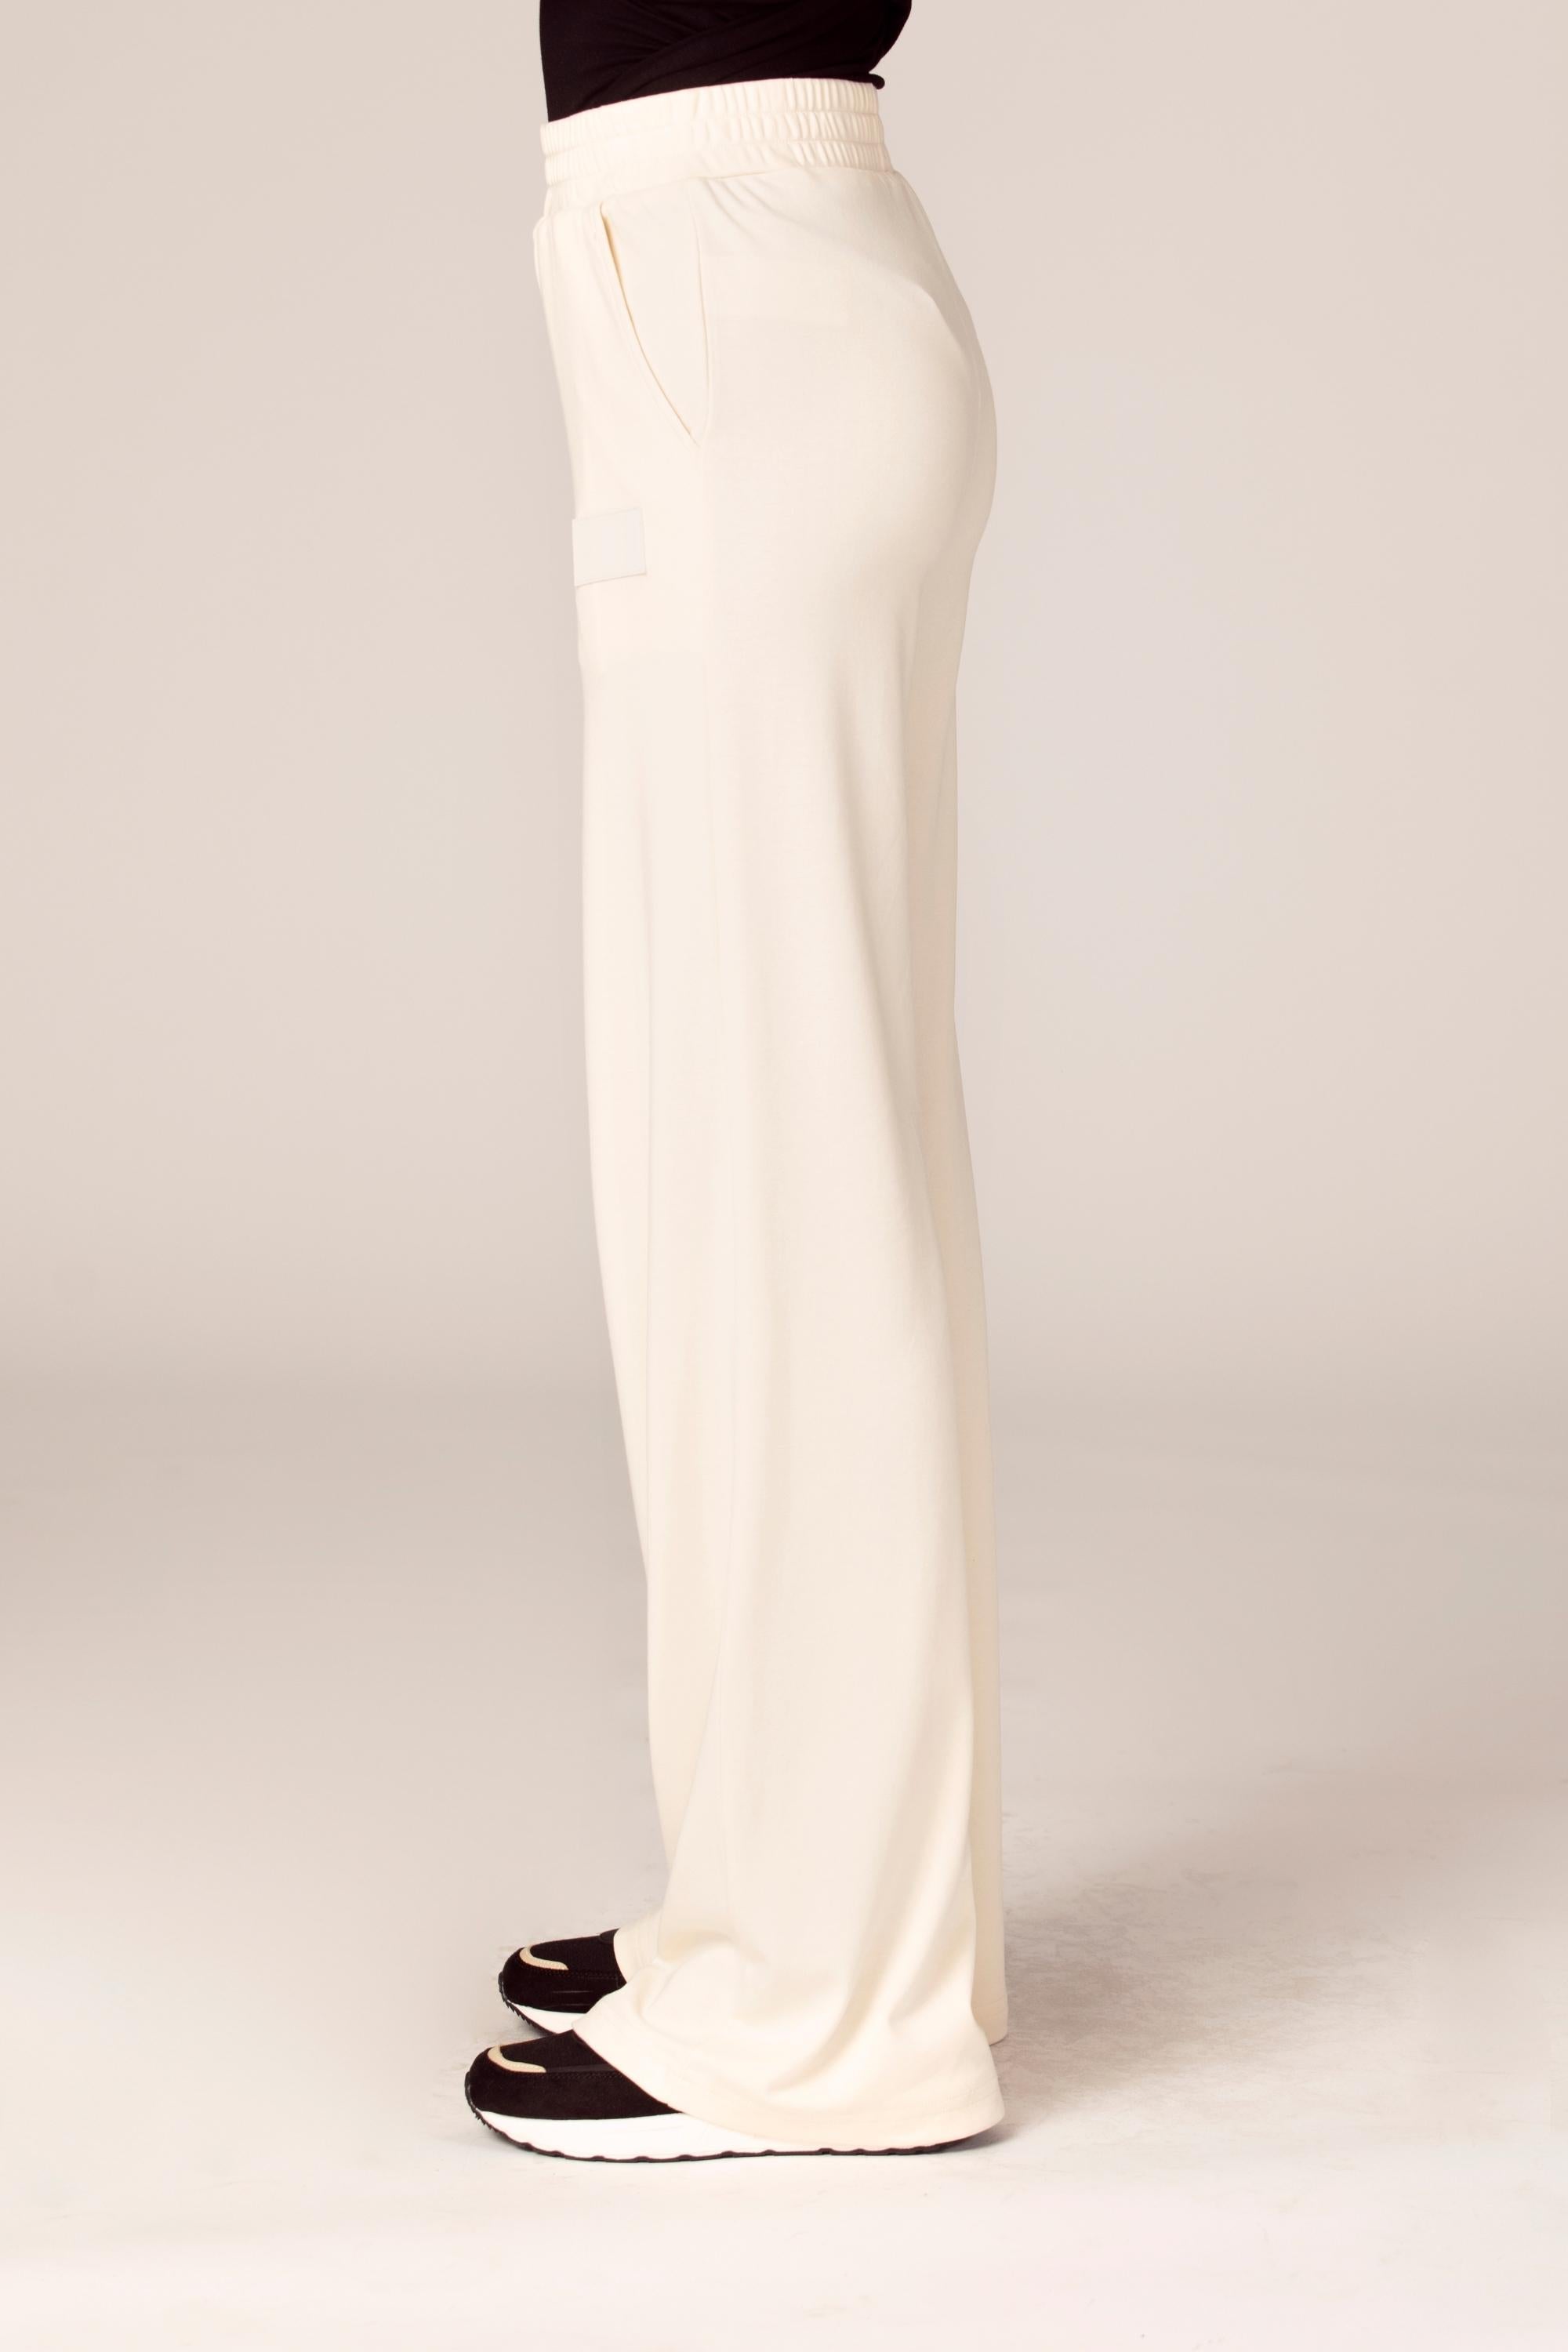 Buy Off White Trousers & Pants for Women by Saffron Threads Online |  Ajio.com